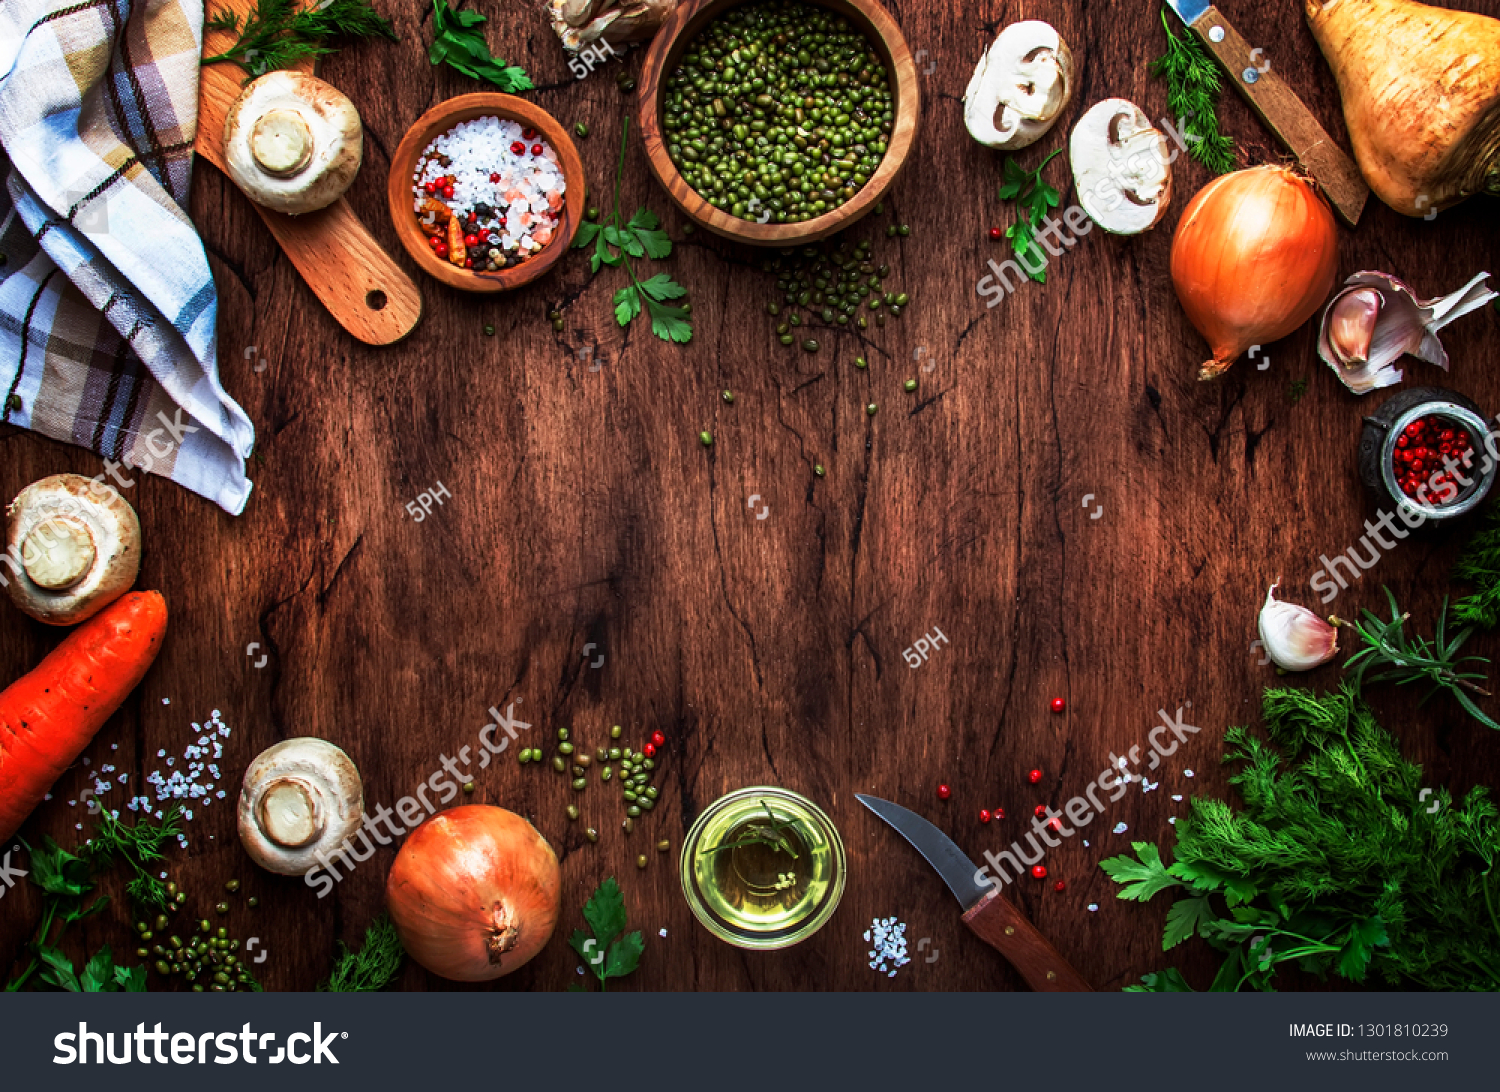 Ingredients for cooking green lentils with mushrooms and vegetables, spices and herbs, vintage wooden kitchen table background, place for text. Vegan or vegetarian food, clean food concept.  #1301810239